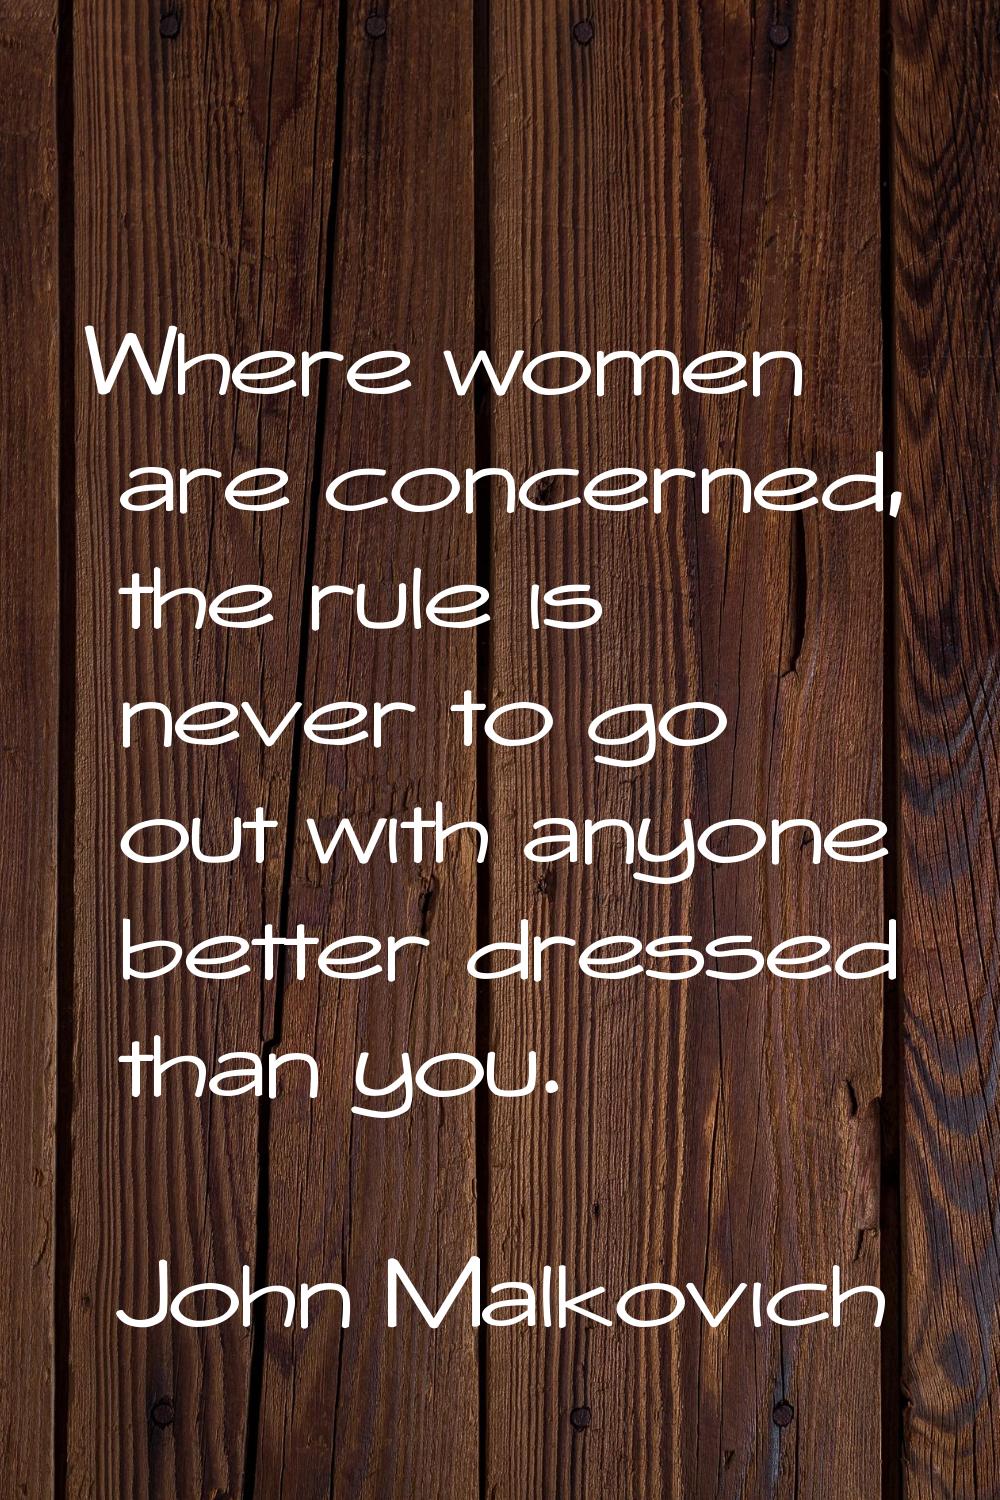 Where women are concerned, the rule is never to go out with anyone better dressed than you.